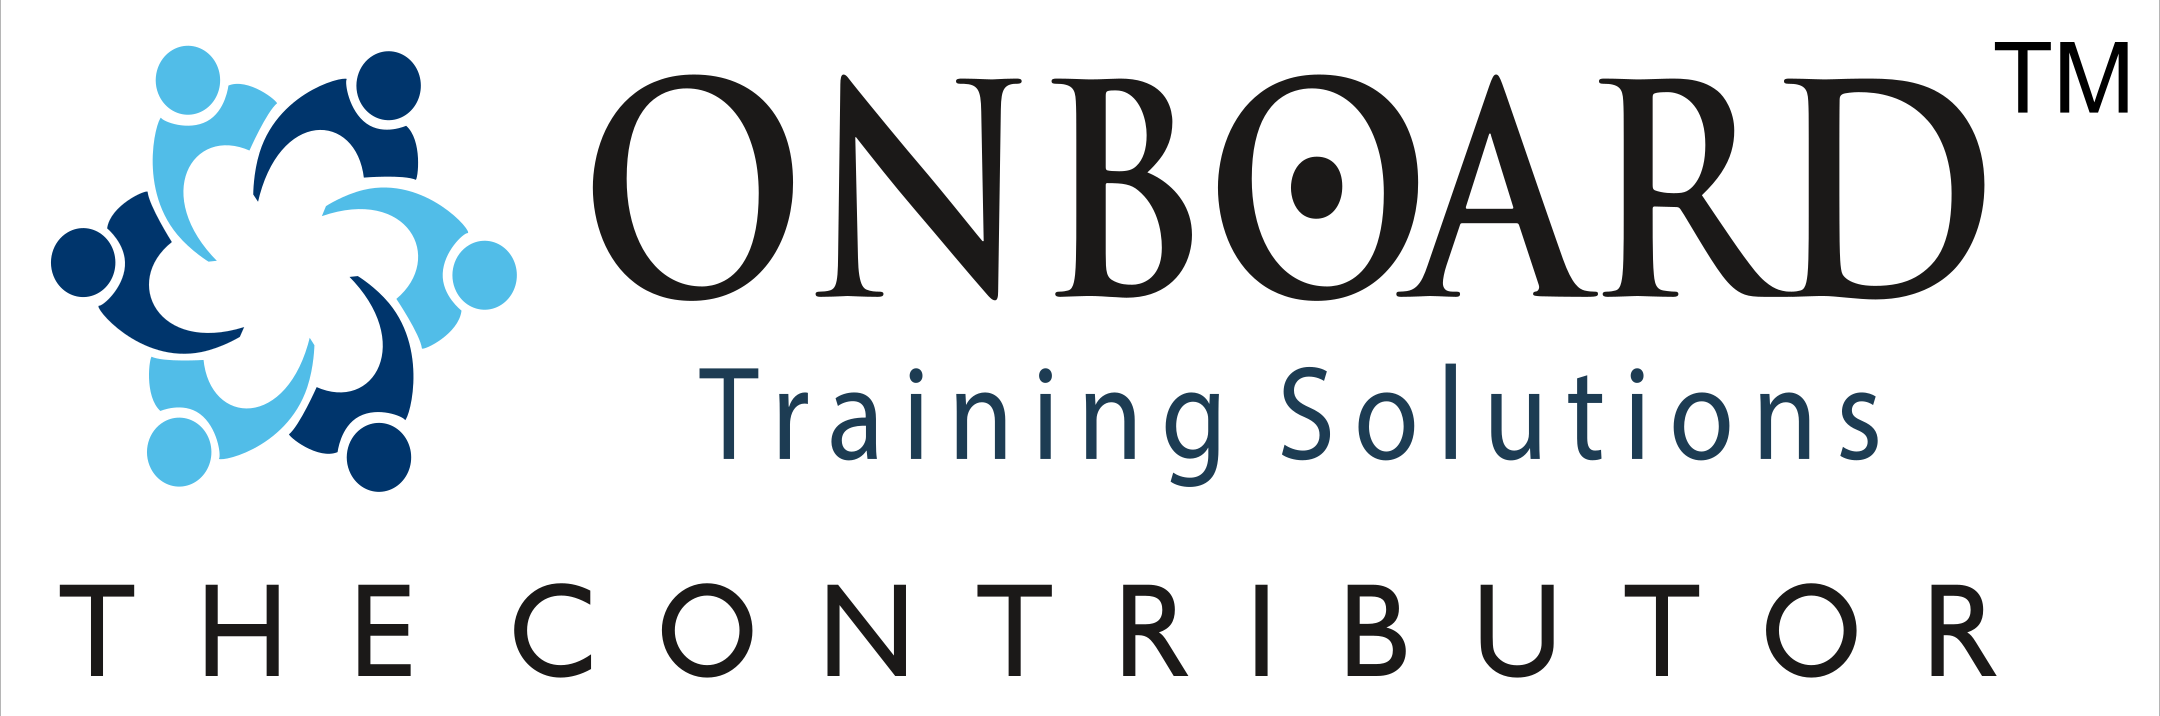 Onboard Training Solution